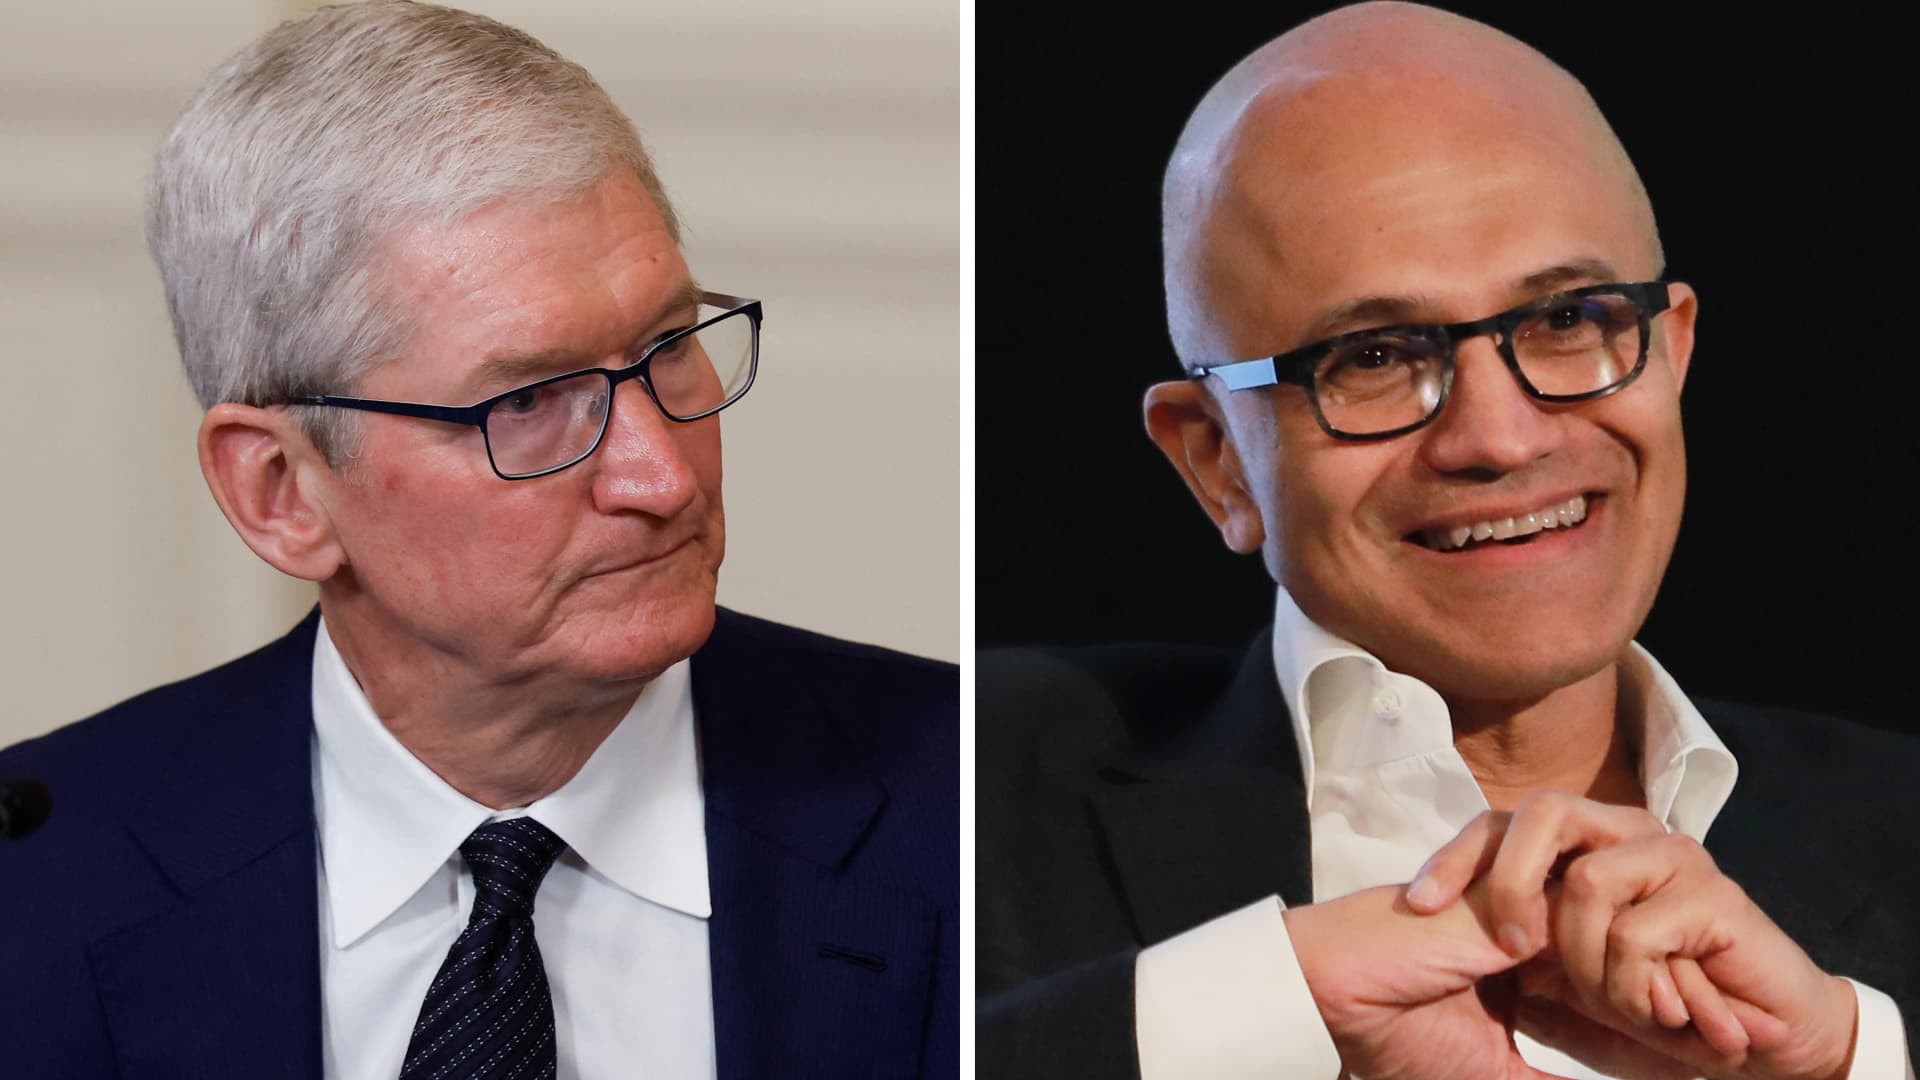 Microsoft tops Apple as world's most valuable public company